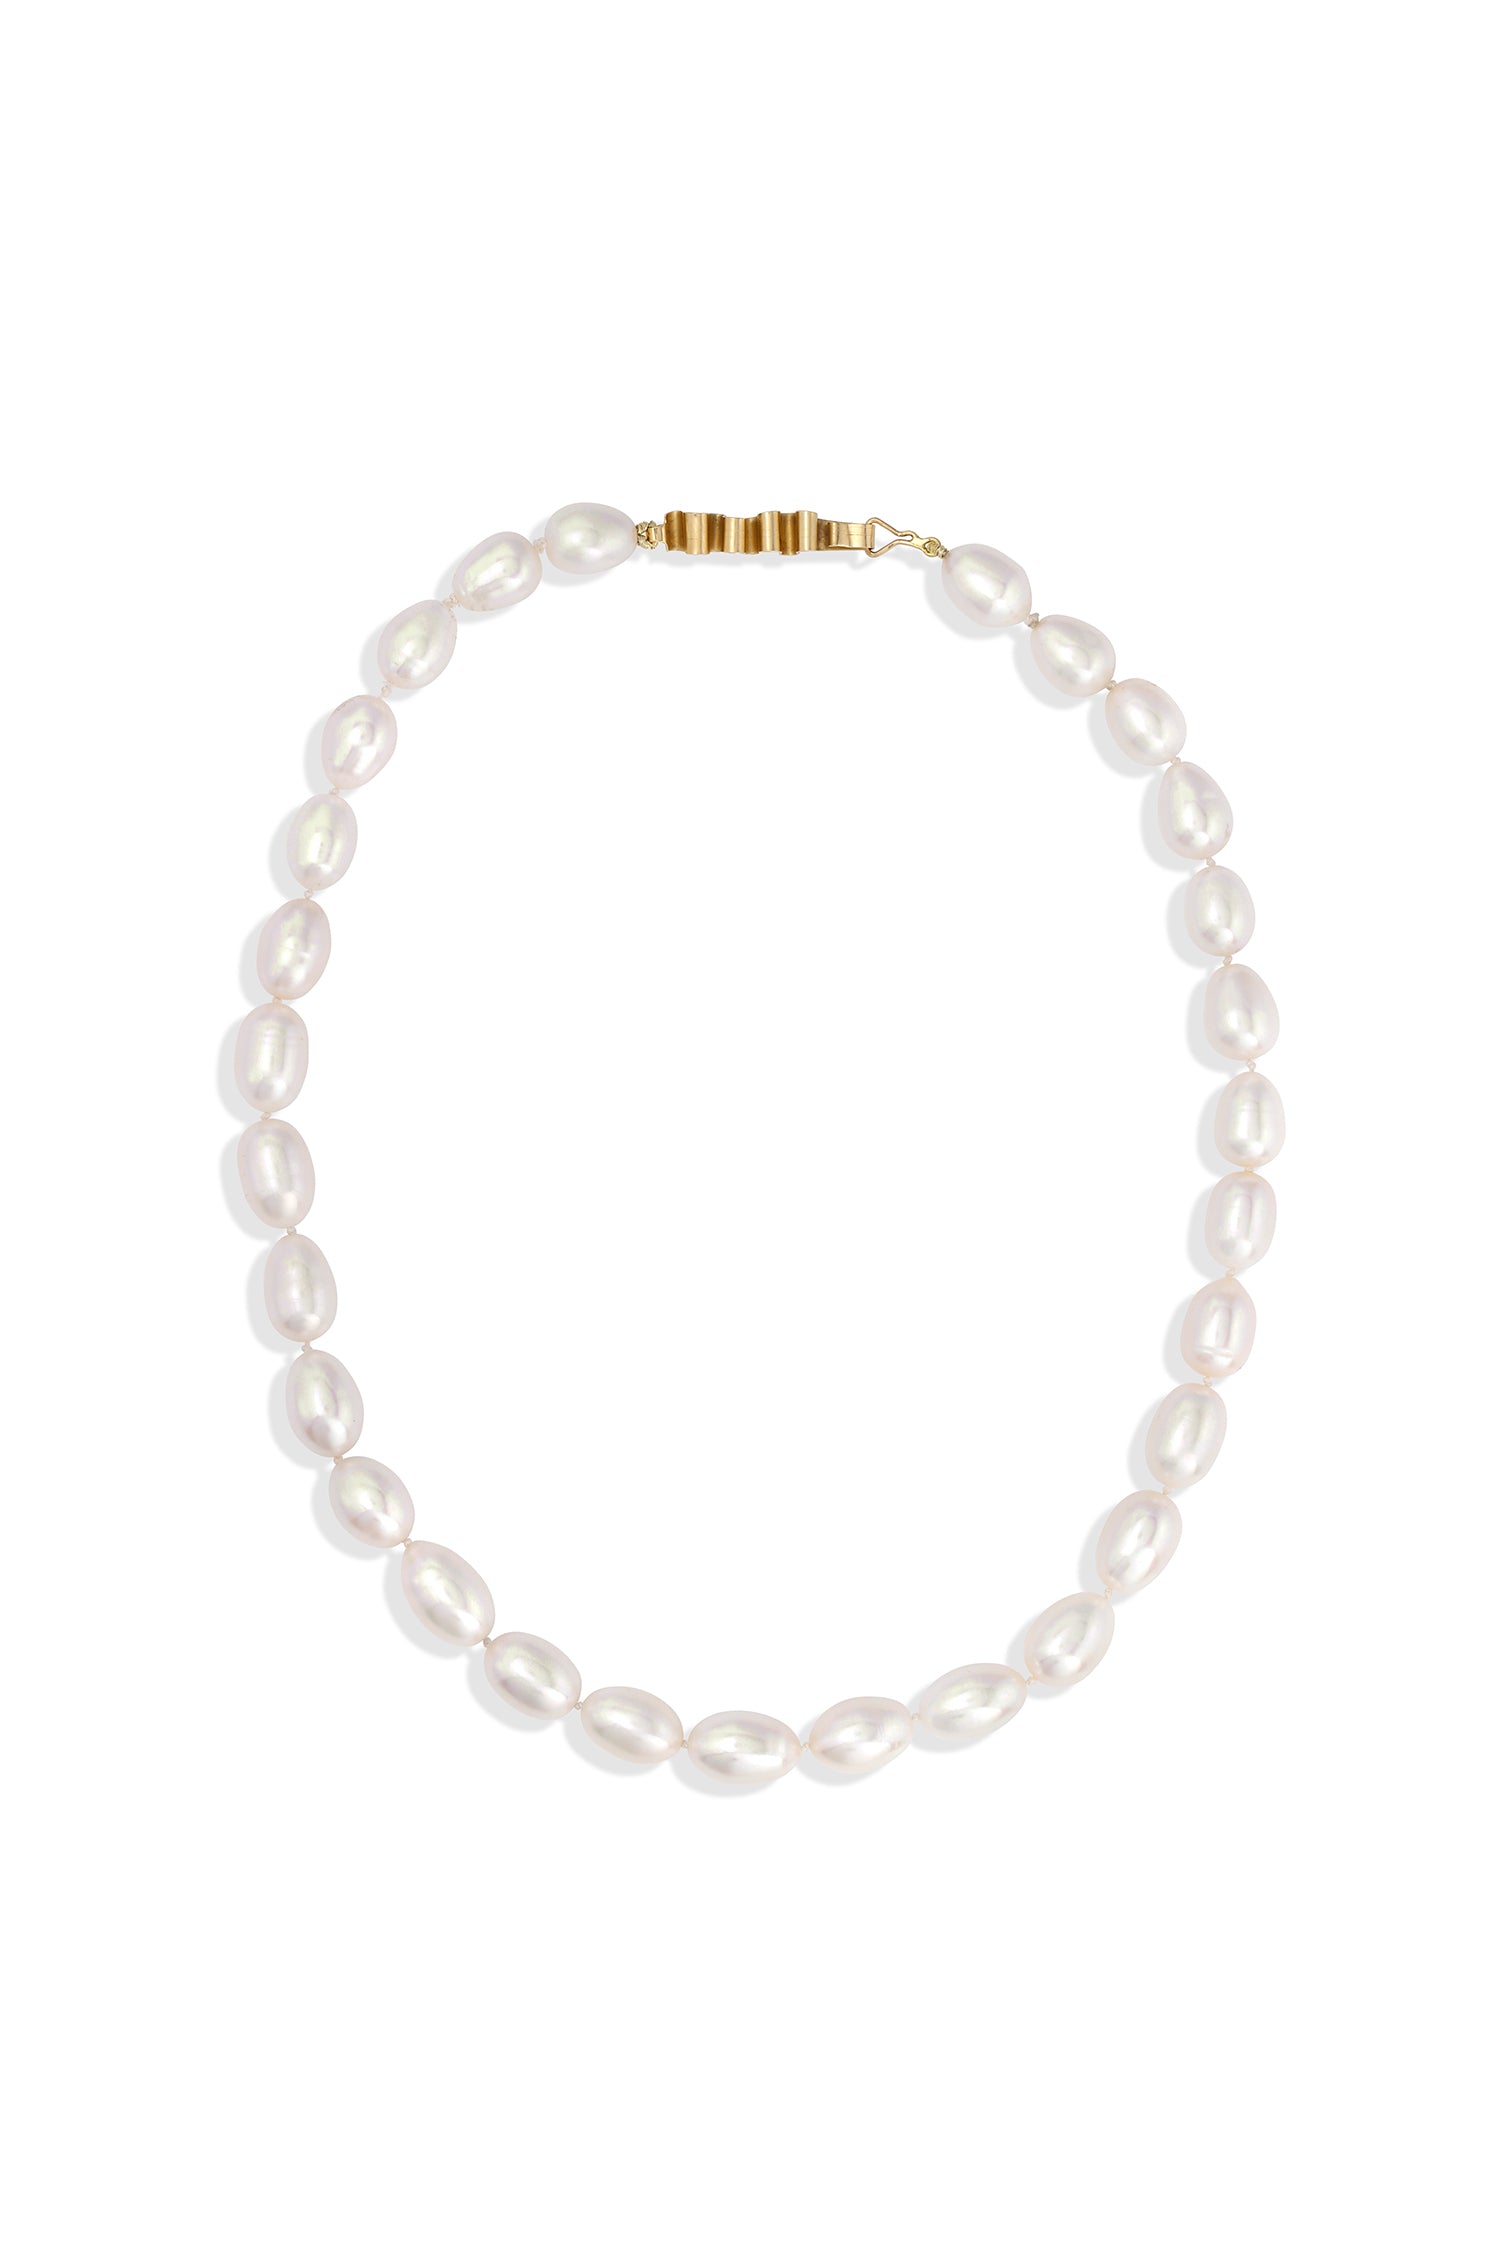 Pearls with Handmade 14K Gold Clasp